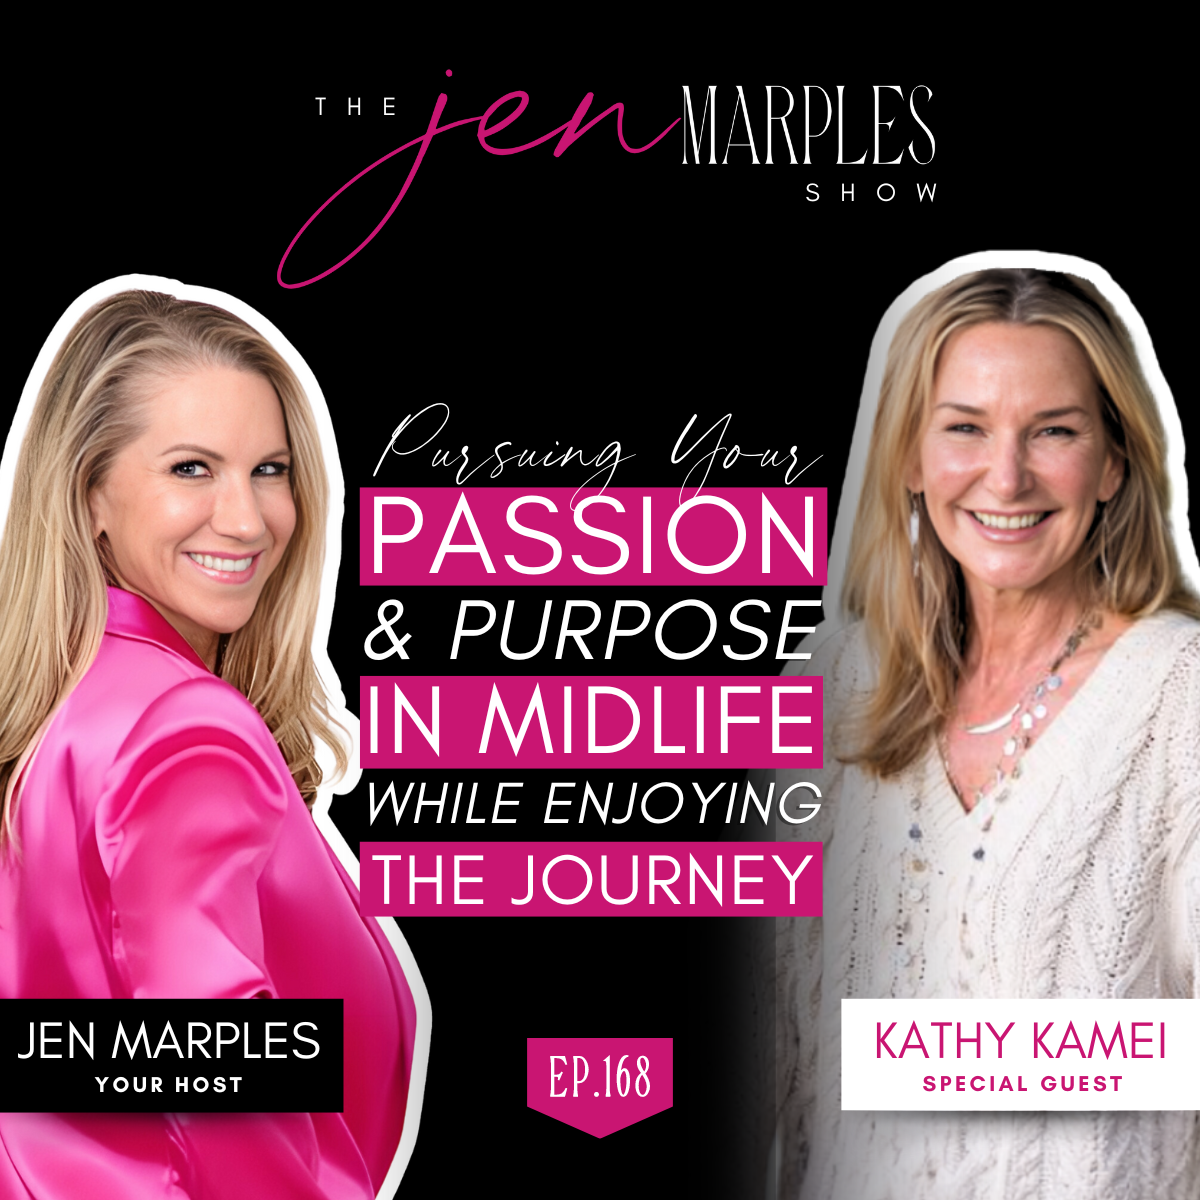 Pursuing Your Passion and Purpose in Midlife while Enjoying the Journey with Kathy Kamei